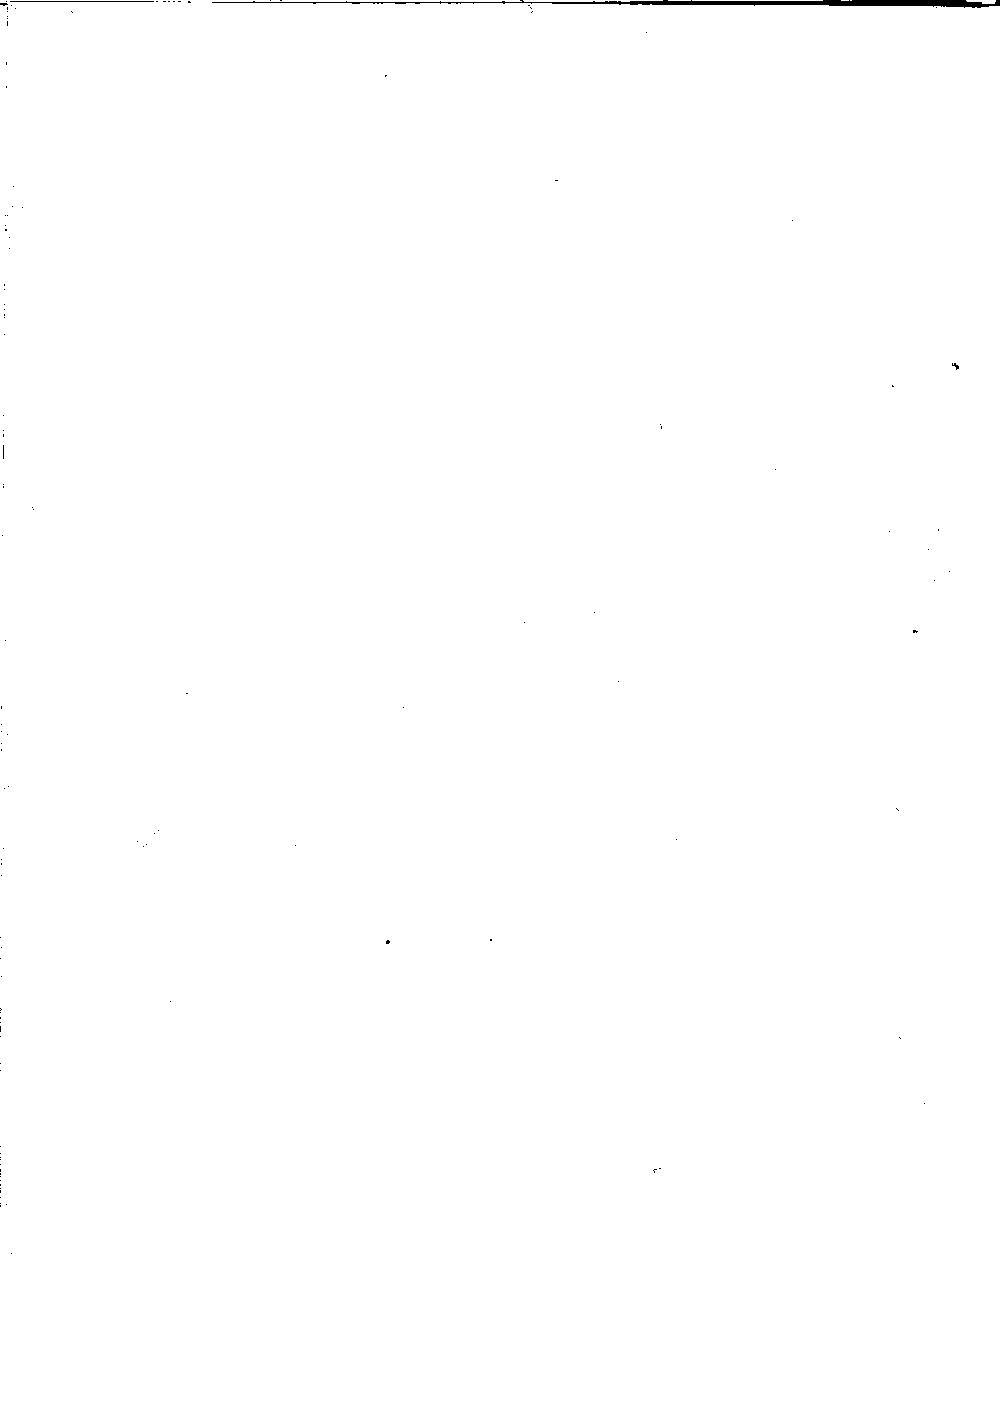 Scan of page 1116